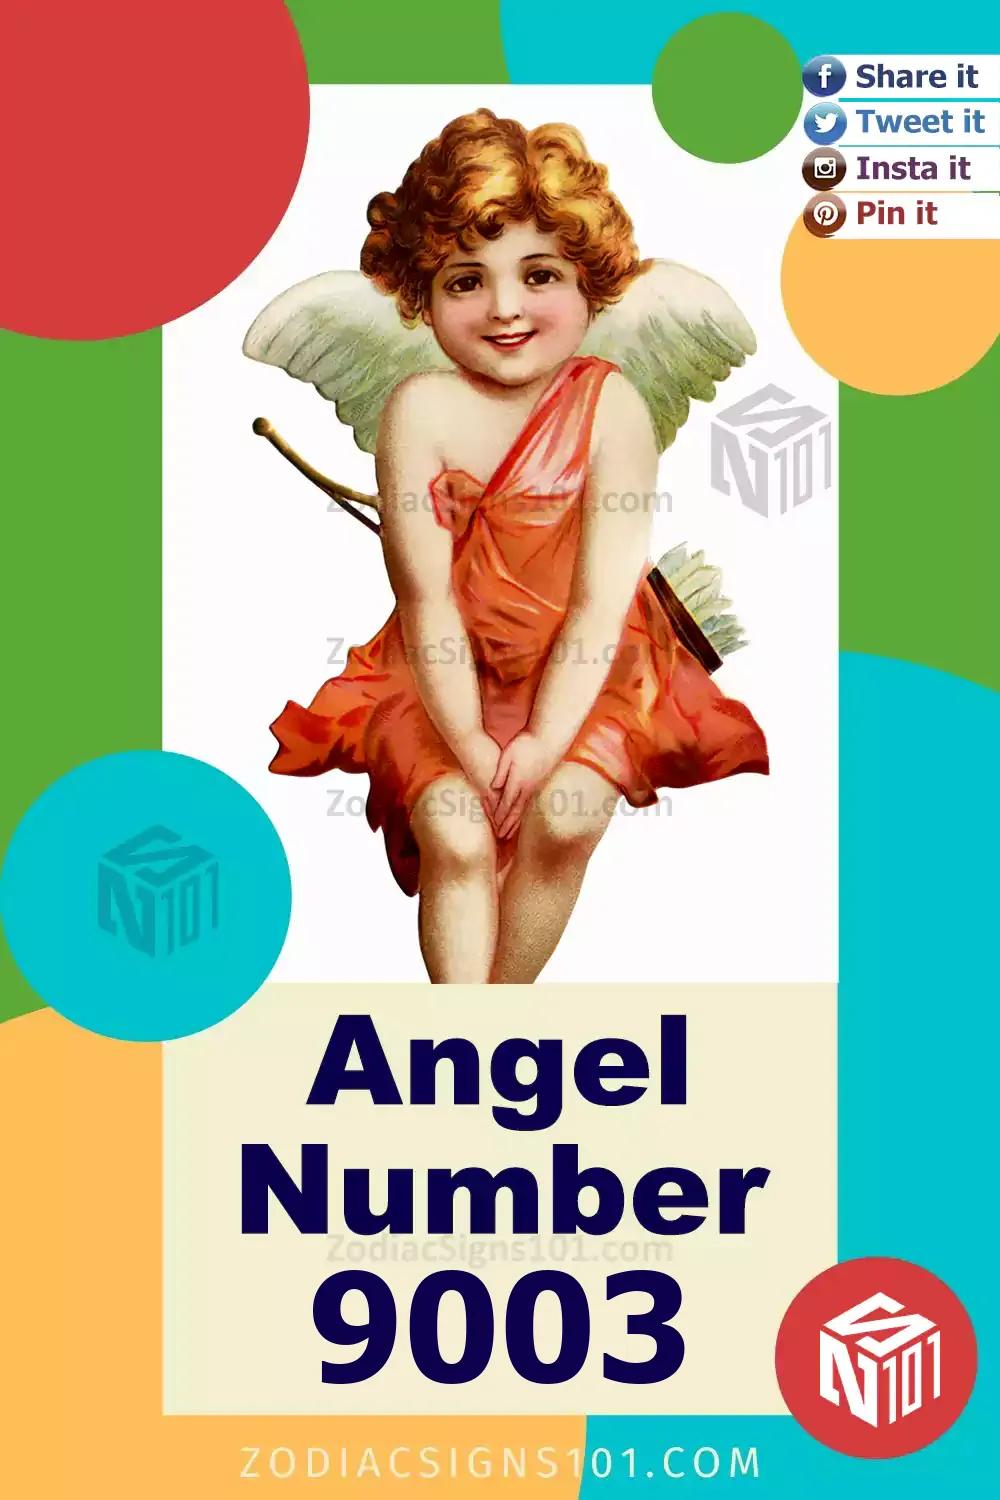 9003 Angel Number Meaning